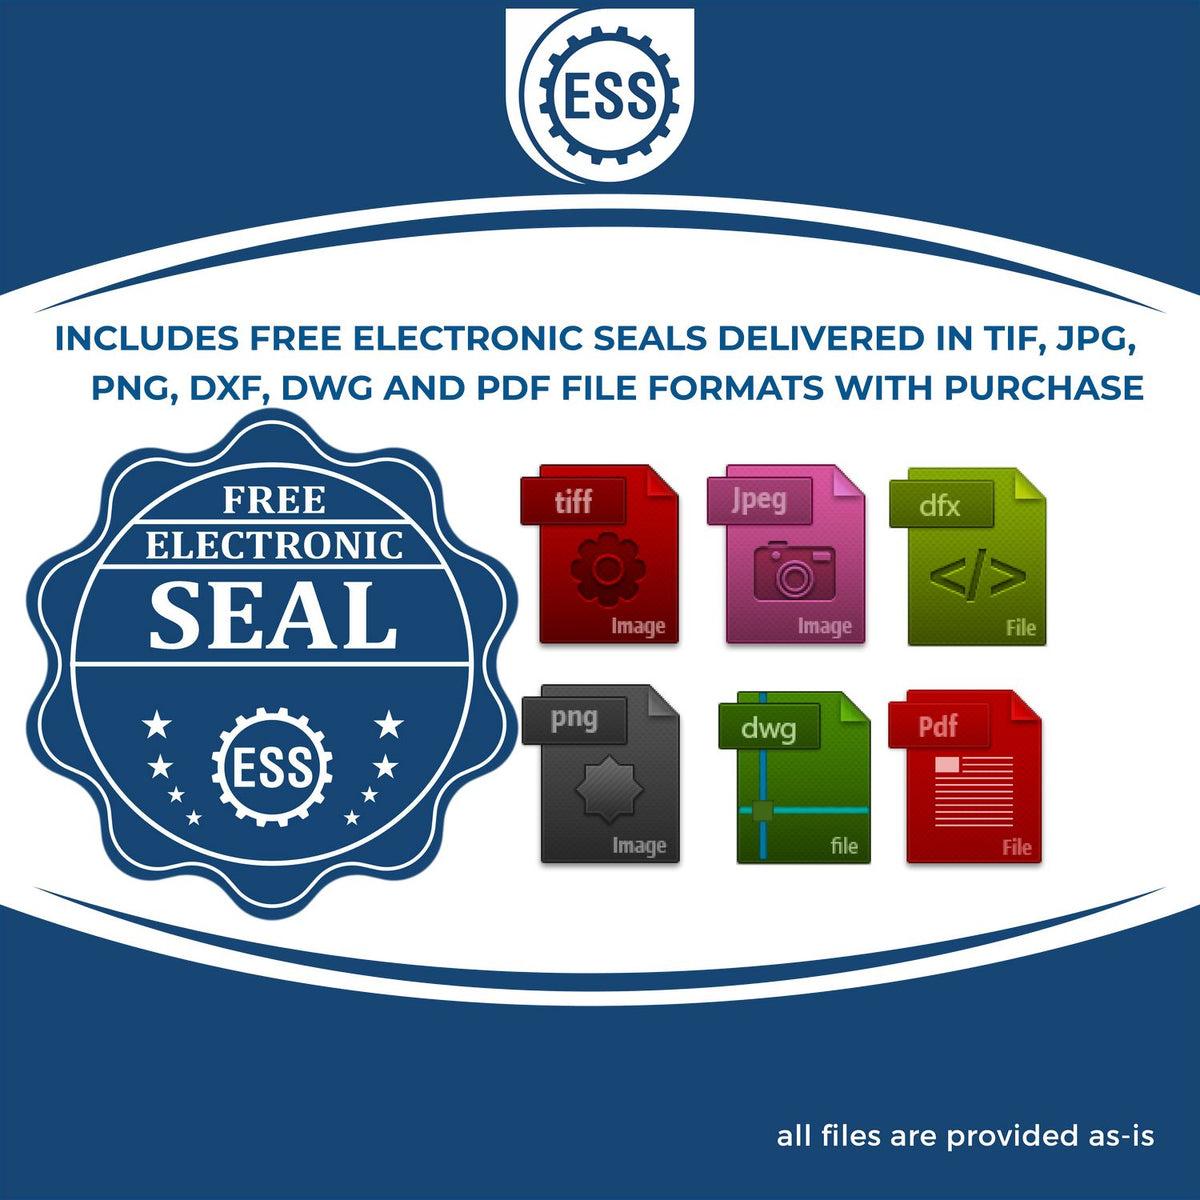 An infographic for the free electronic seal for the State of Kansas Long Reach Architectural Embossing Seal illustrating the different file type icons such as DXF, DWG, TIF, JPG and PNG.